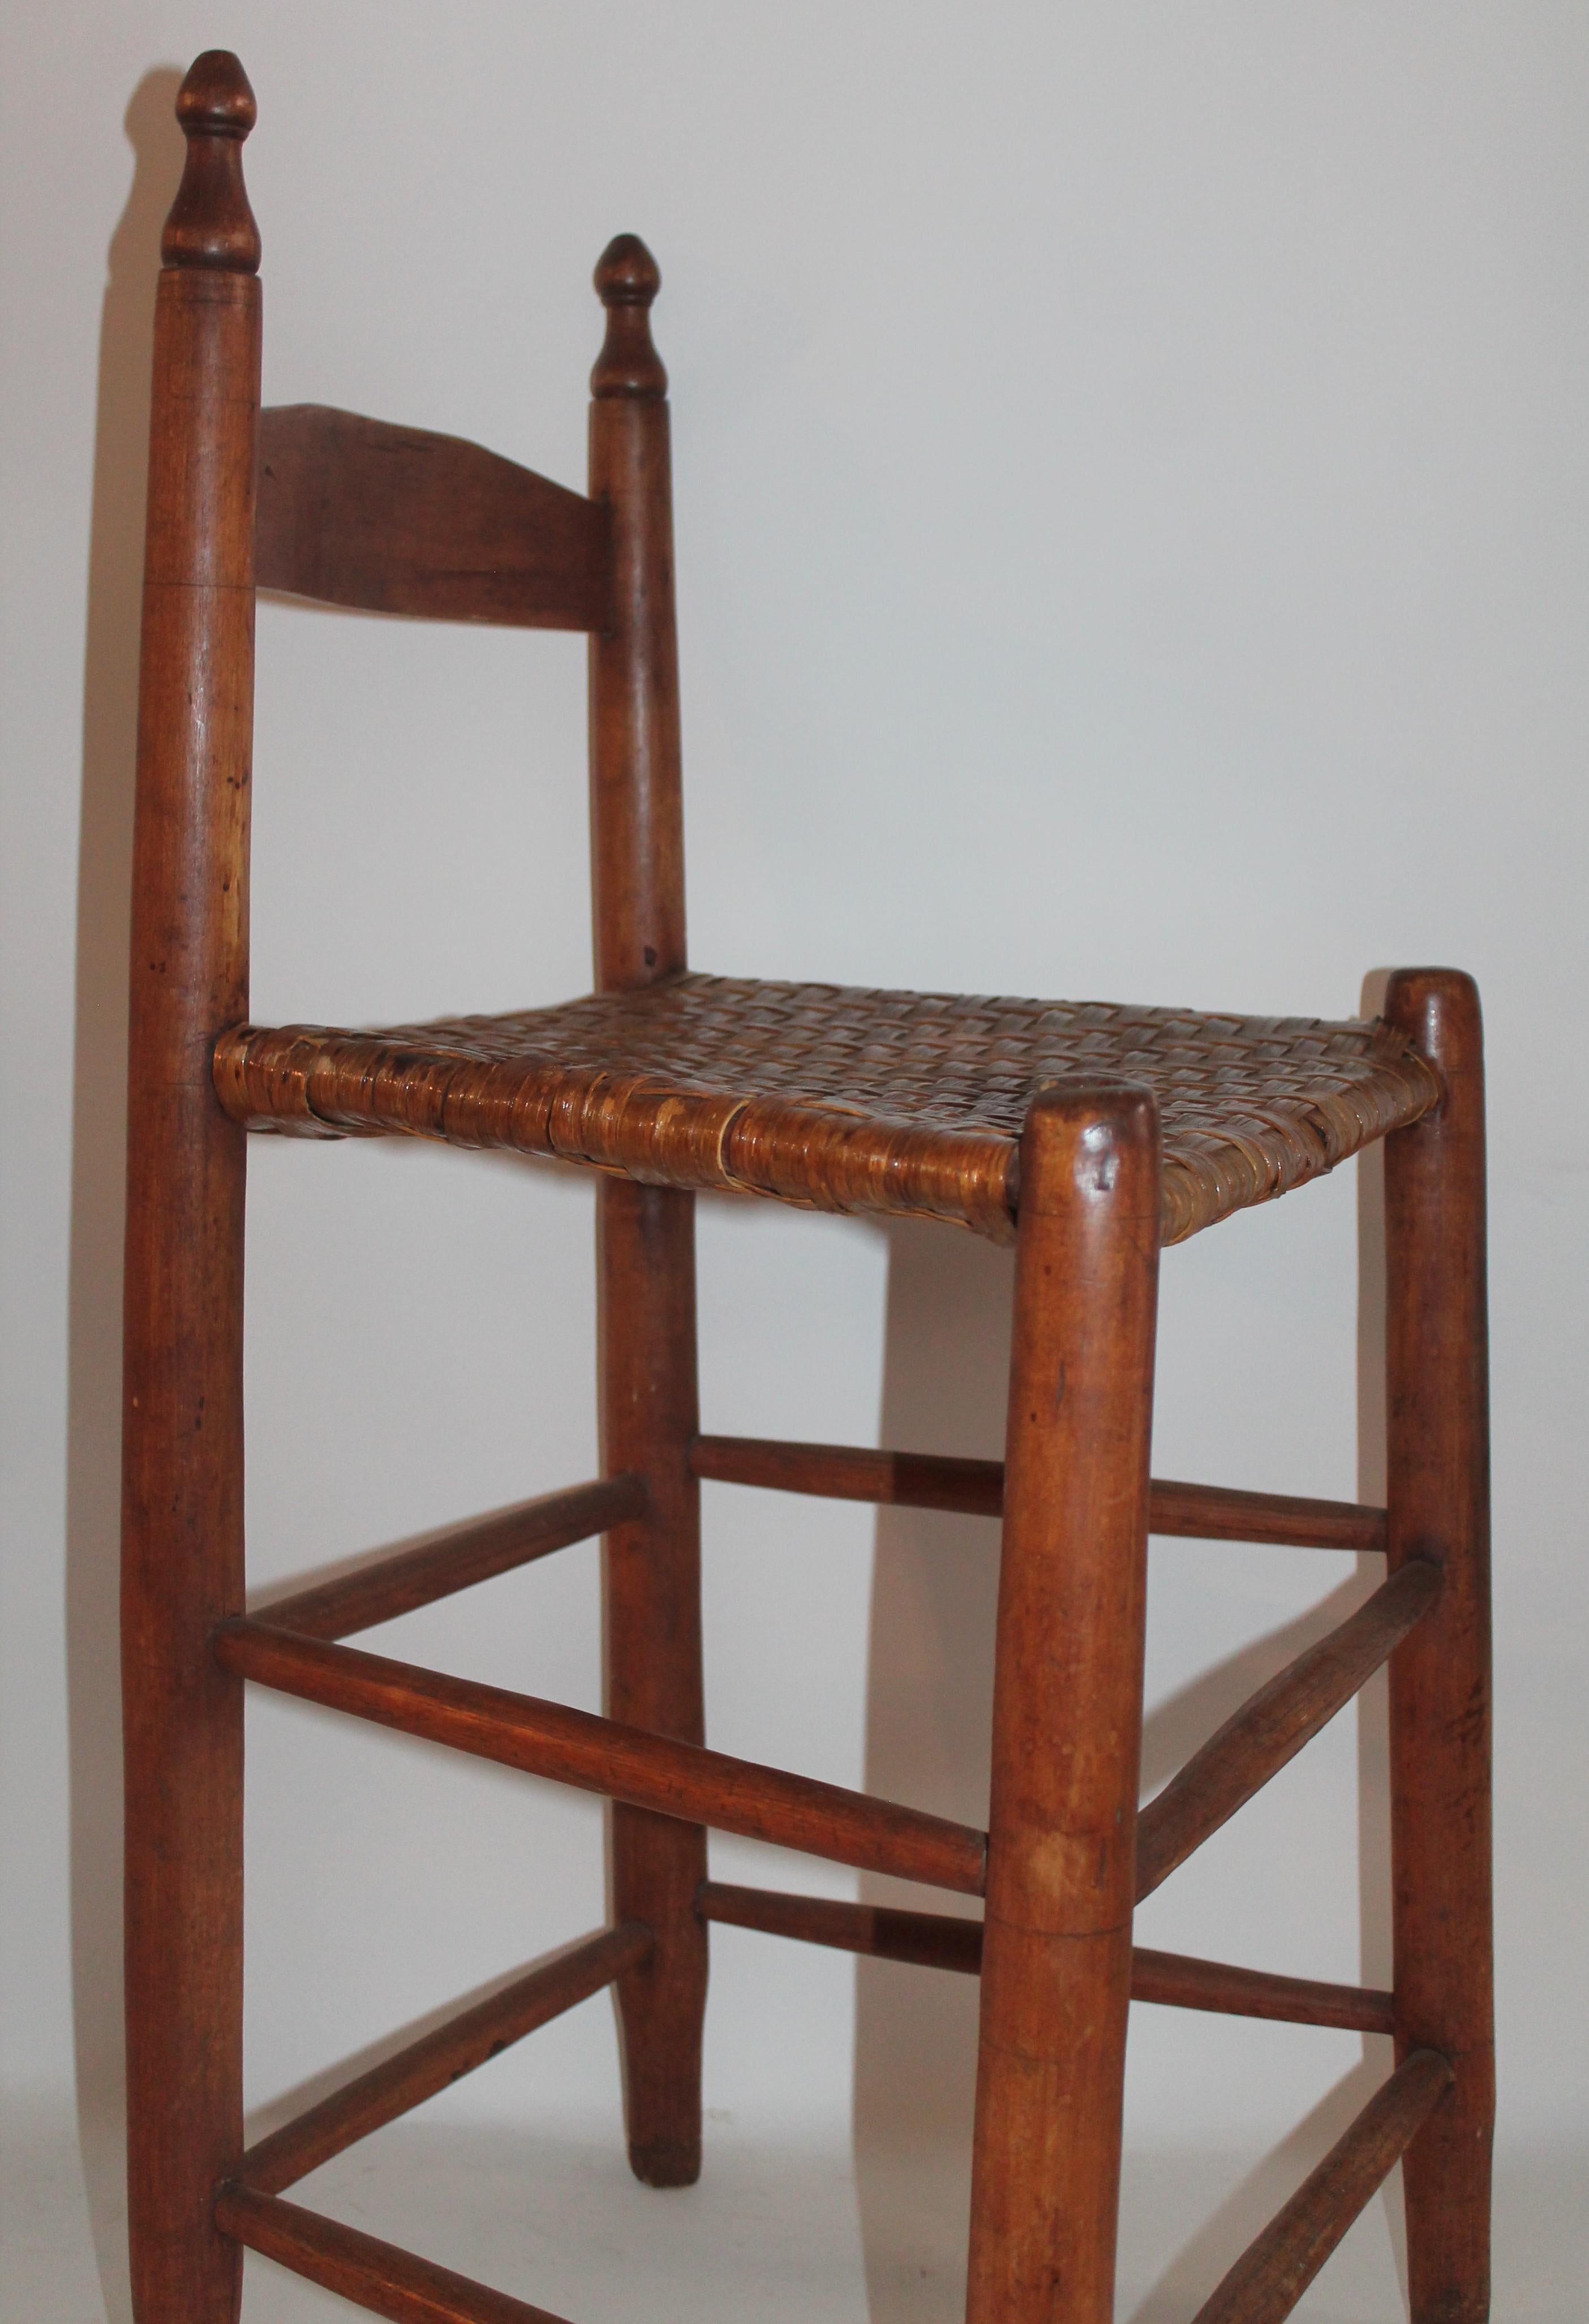 Hand-Crafted 19th Century Shaker Style Chair